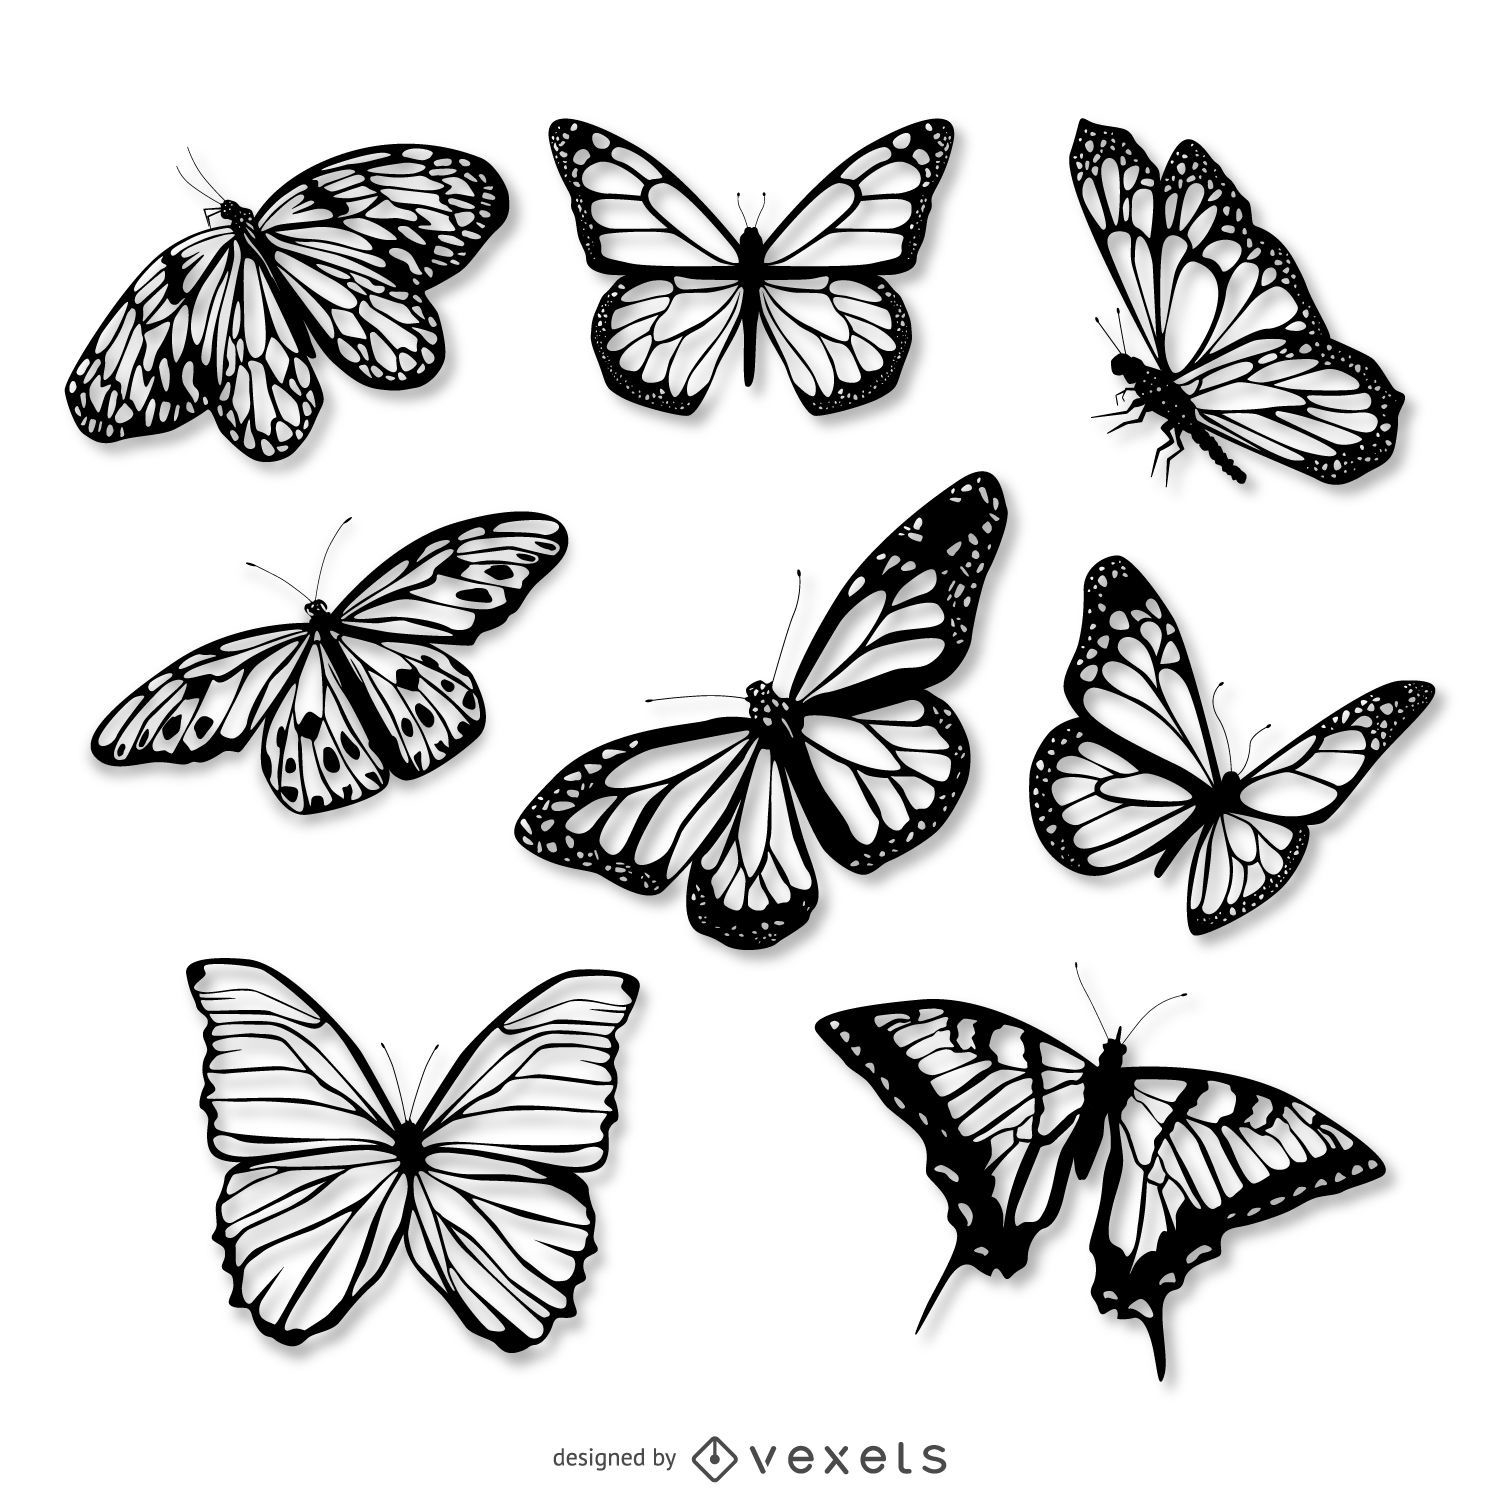 Realistic butterfly illustration set